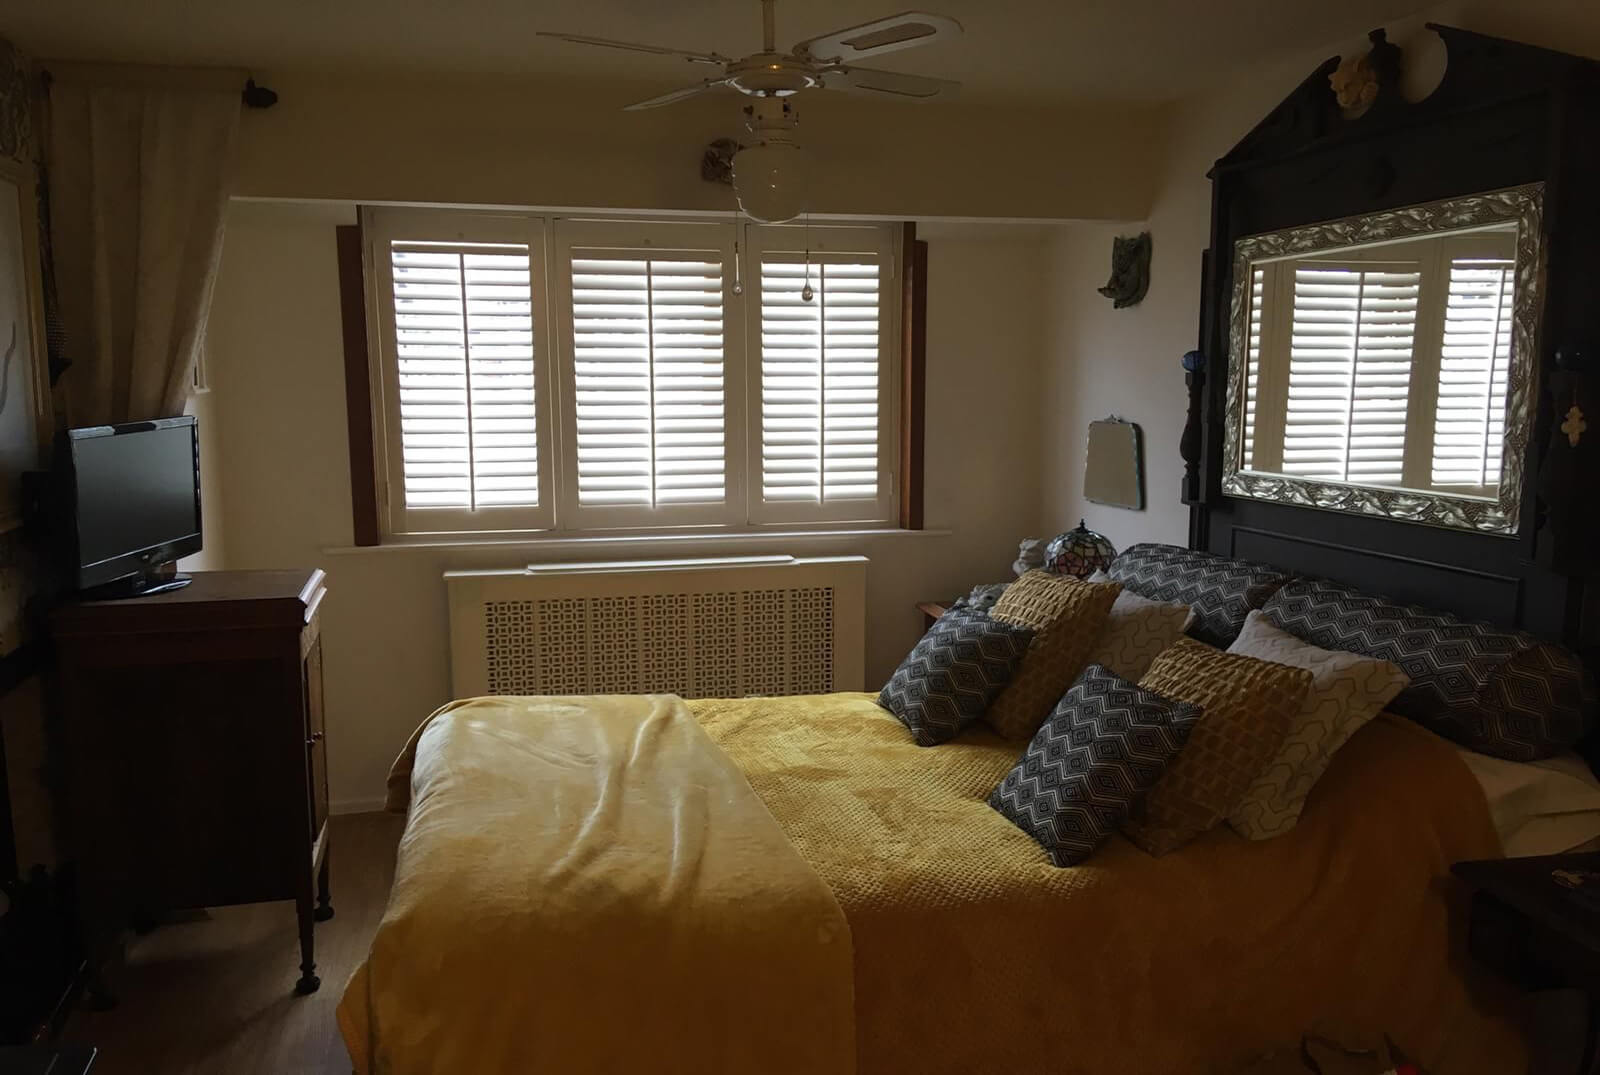 Suppliers of Plantation Shutters For Bay Windows